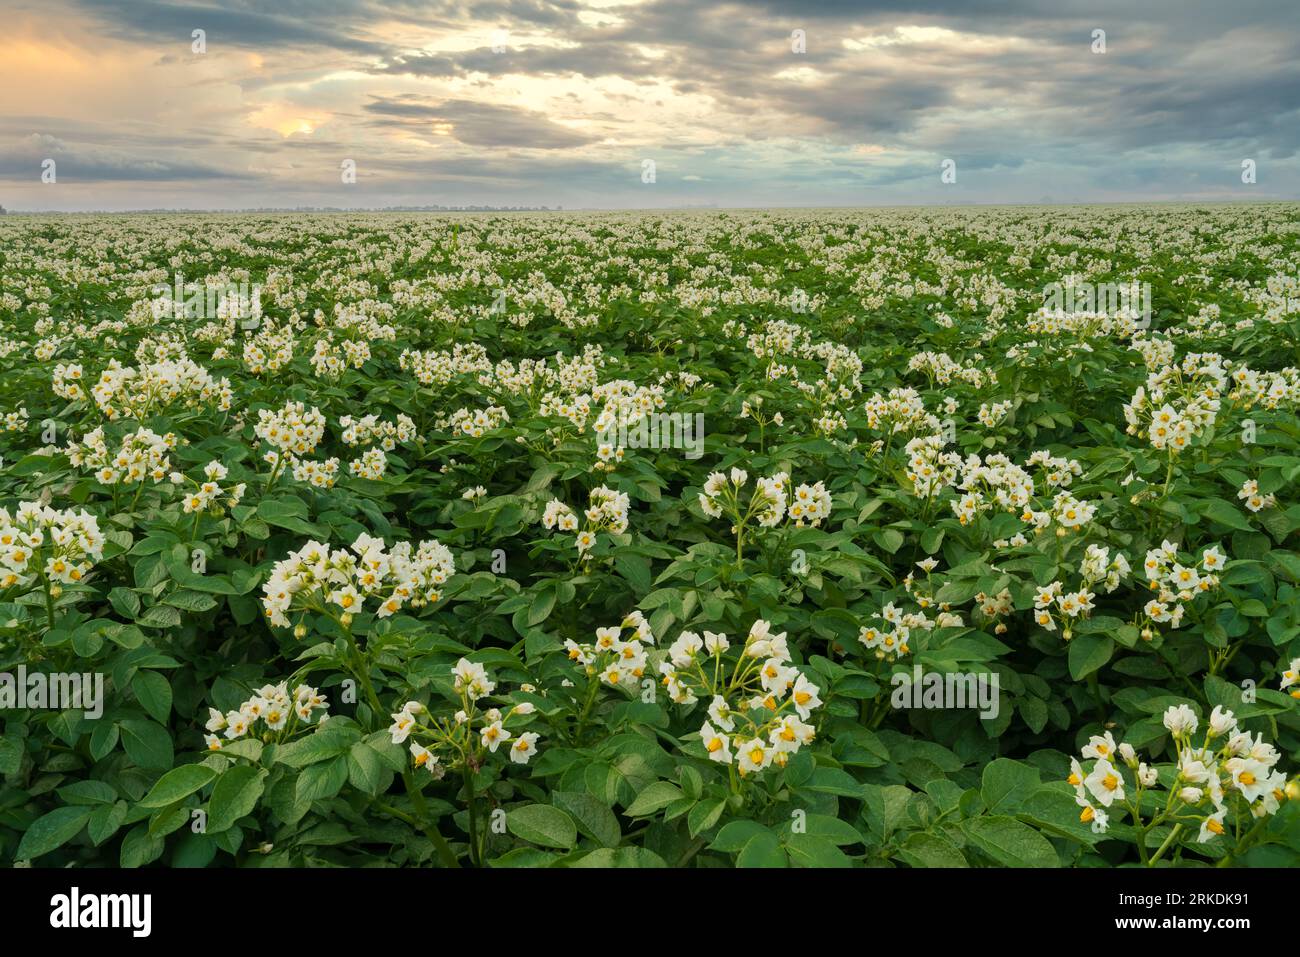 A blooming potatoe field with white blossoms at sunset near Winkler, Manitoba, Canada. Stock Photo